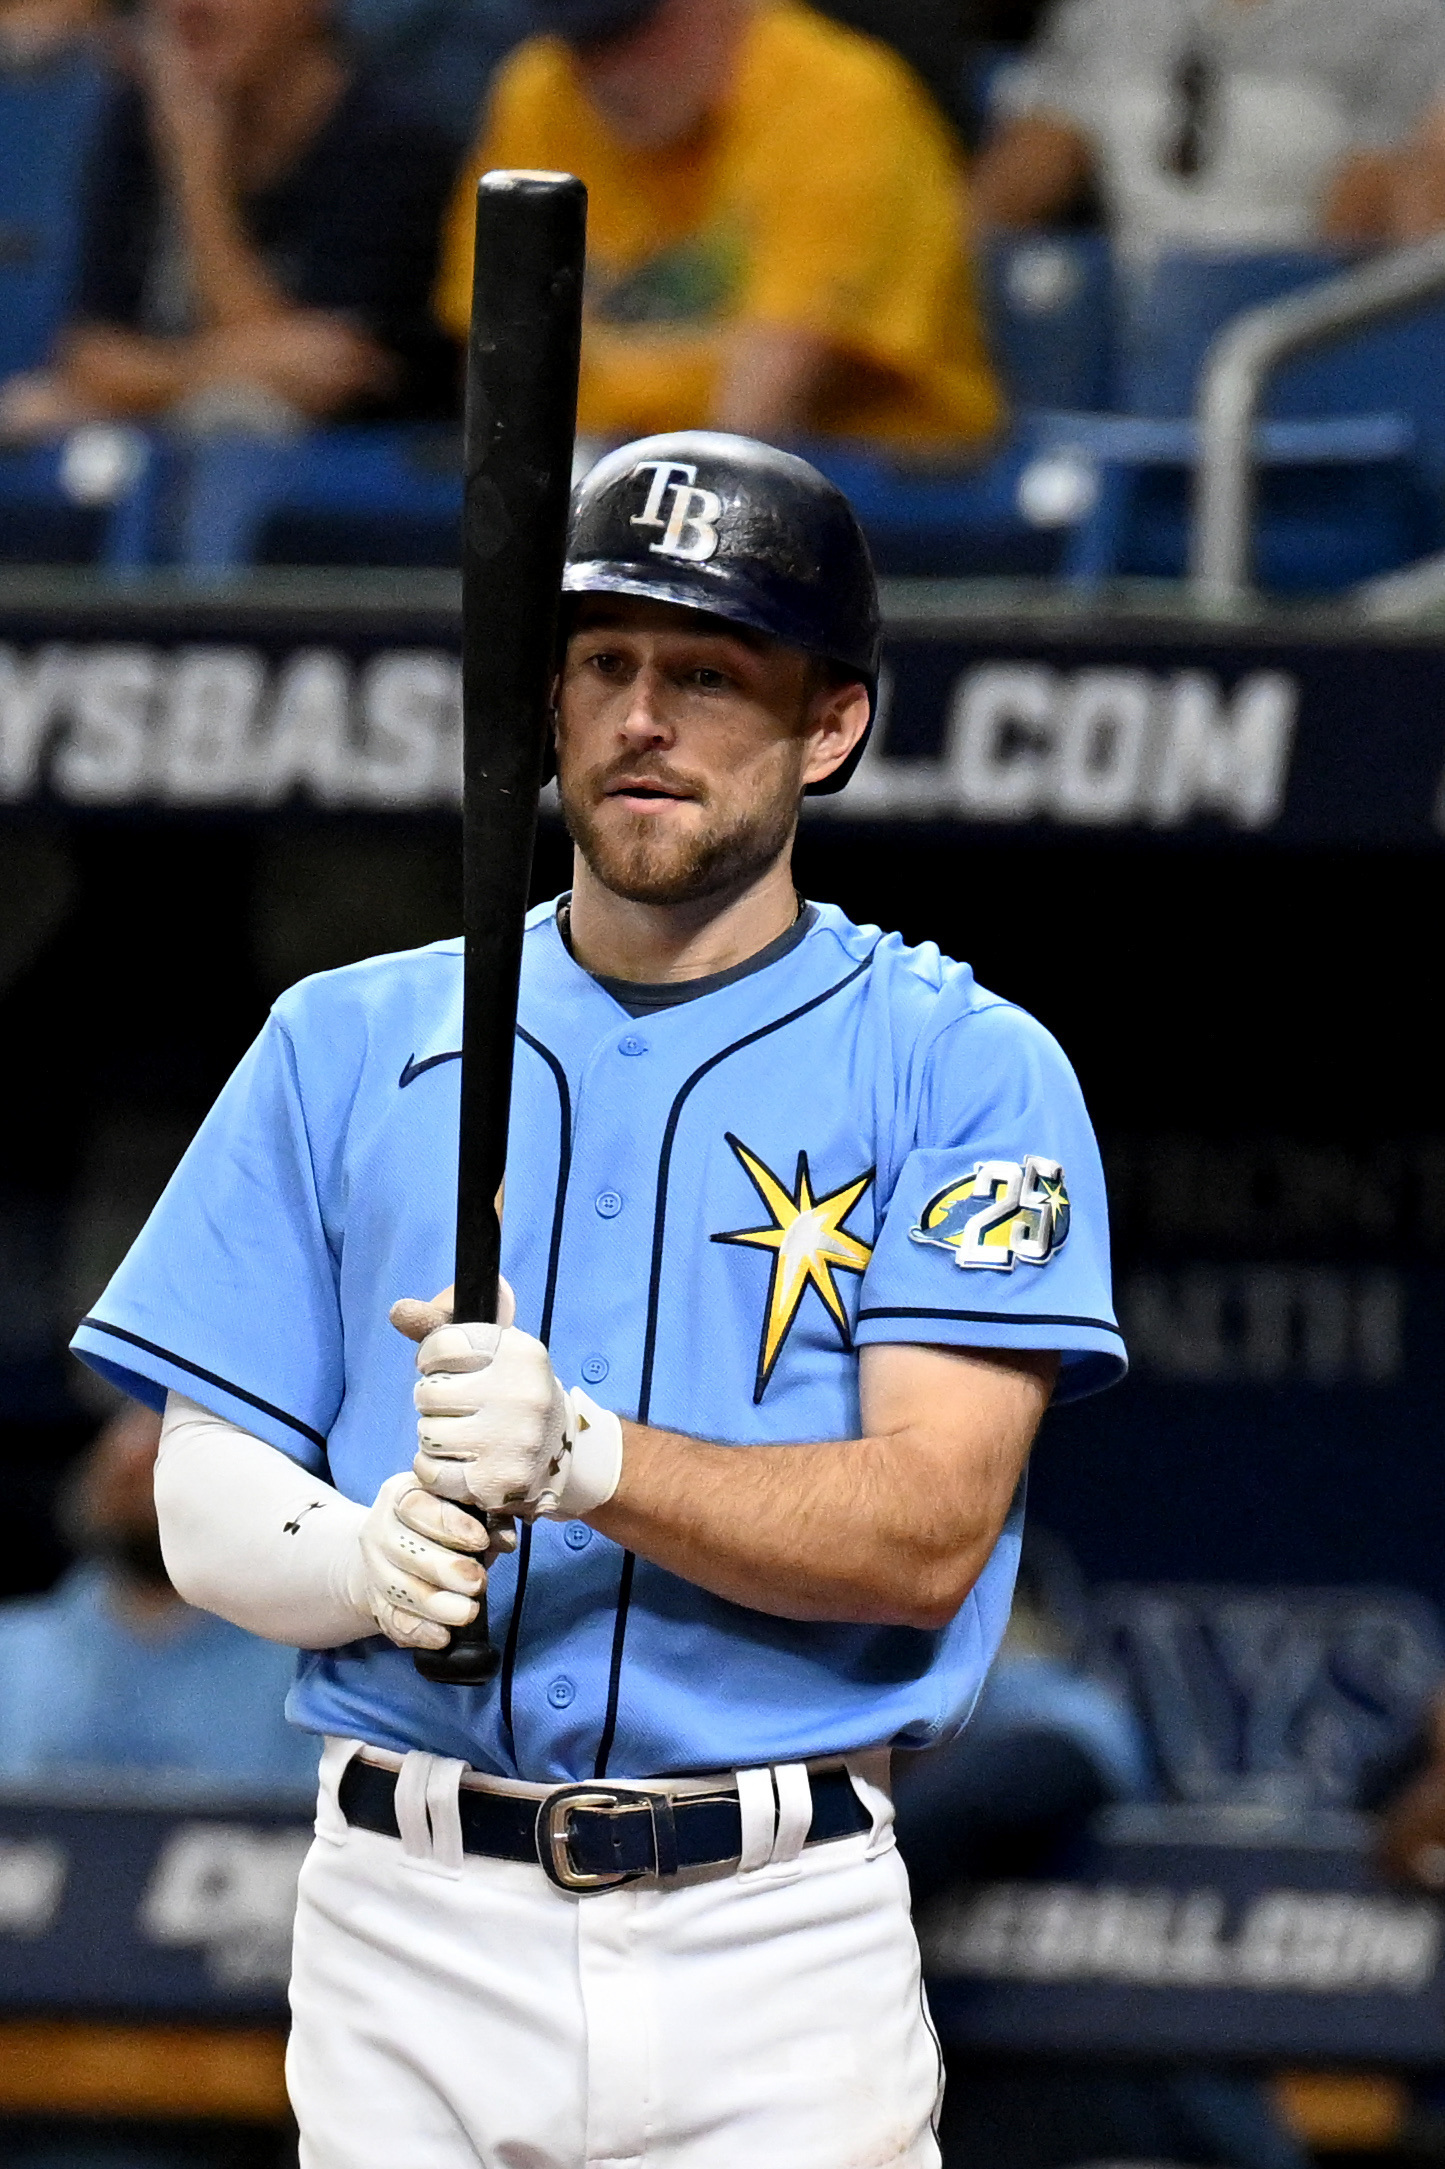 Rays pull out opener vs. O's, cut AL East gap to 1